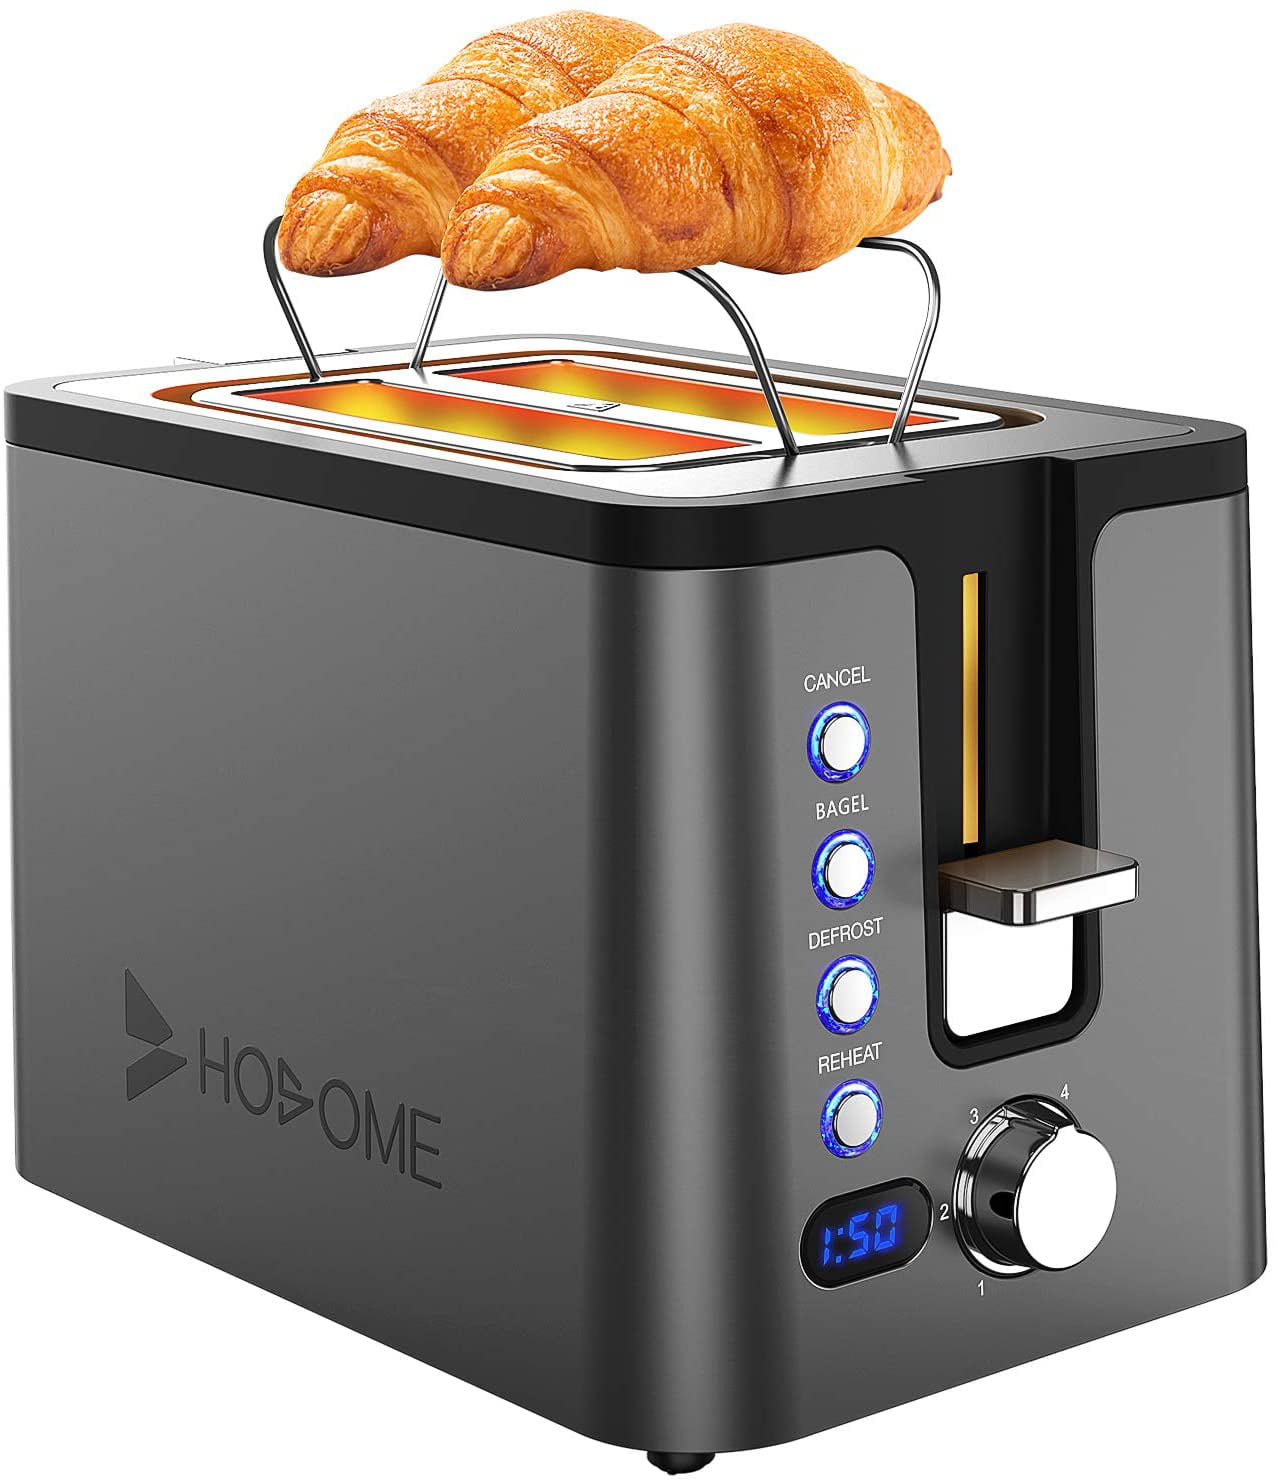 Toaster 2 Slice KOTIAN Compact Bread Toaster 6 Browning  Settings,Cancel/Defrost/Reheat Function,Removable Crumb Tray,Turquoise  Green,800W